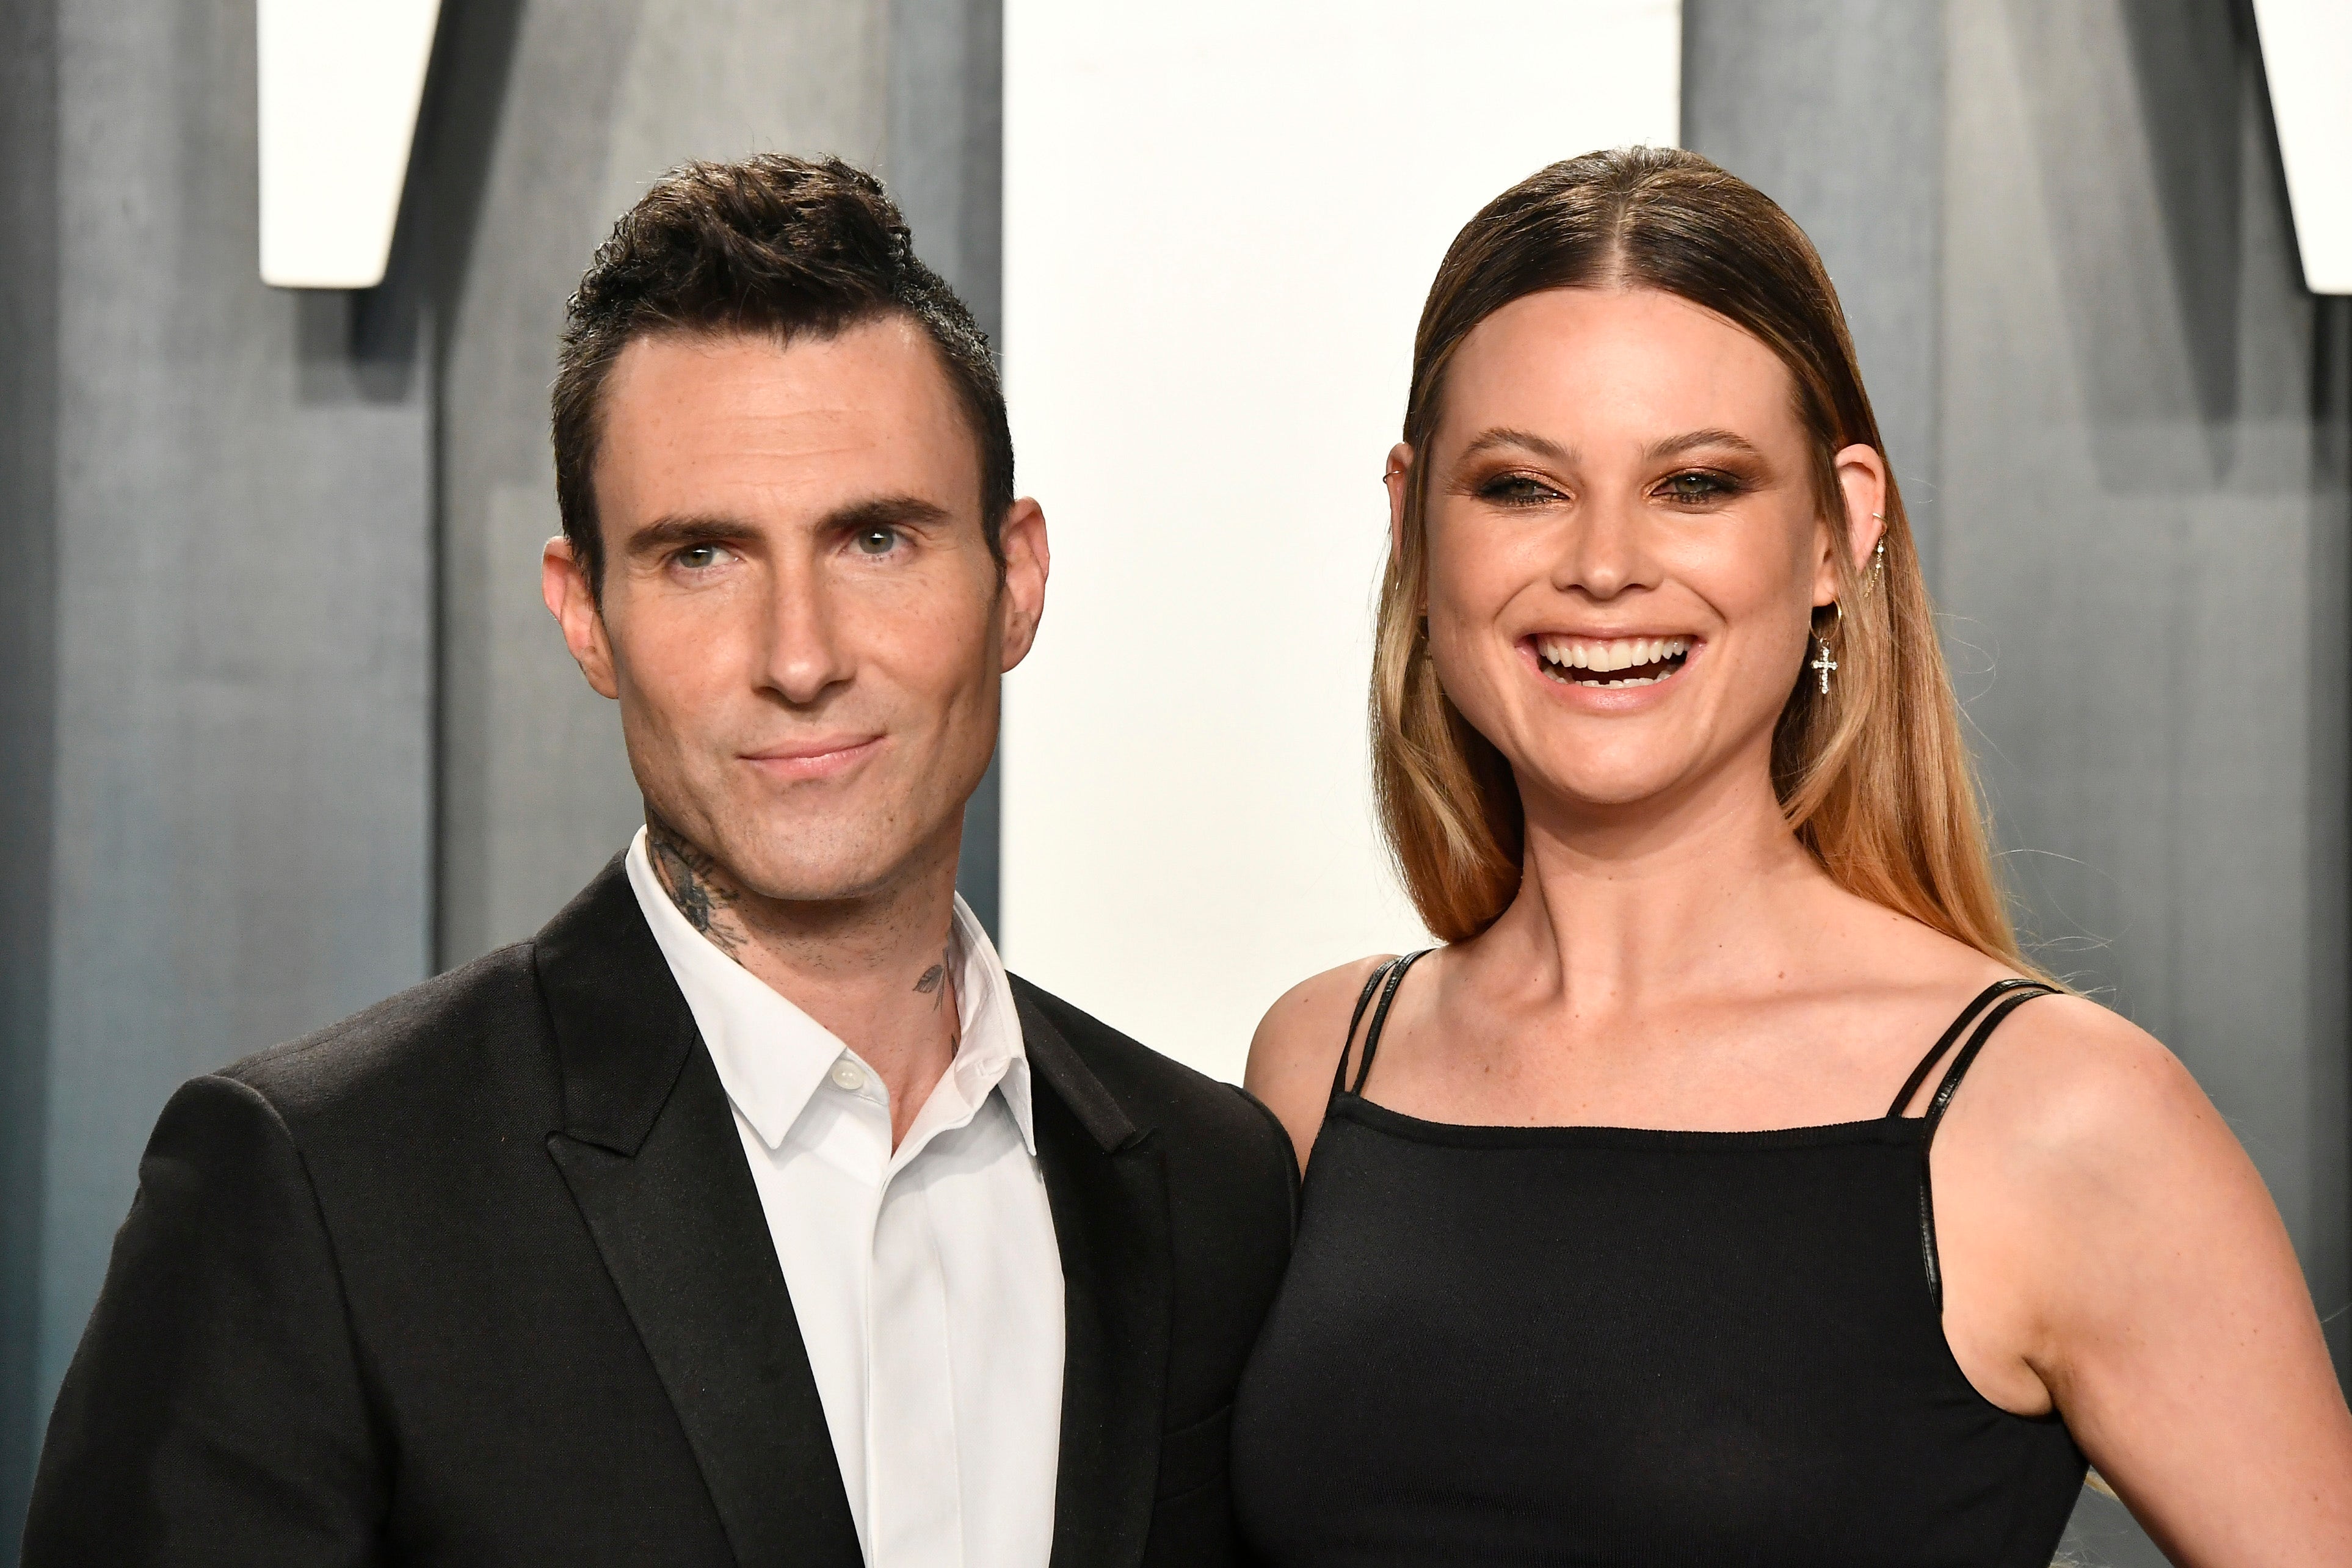 Behati Prinsloo returns to social media with candid put up after Adam Levine dishonest allegations